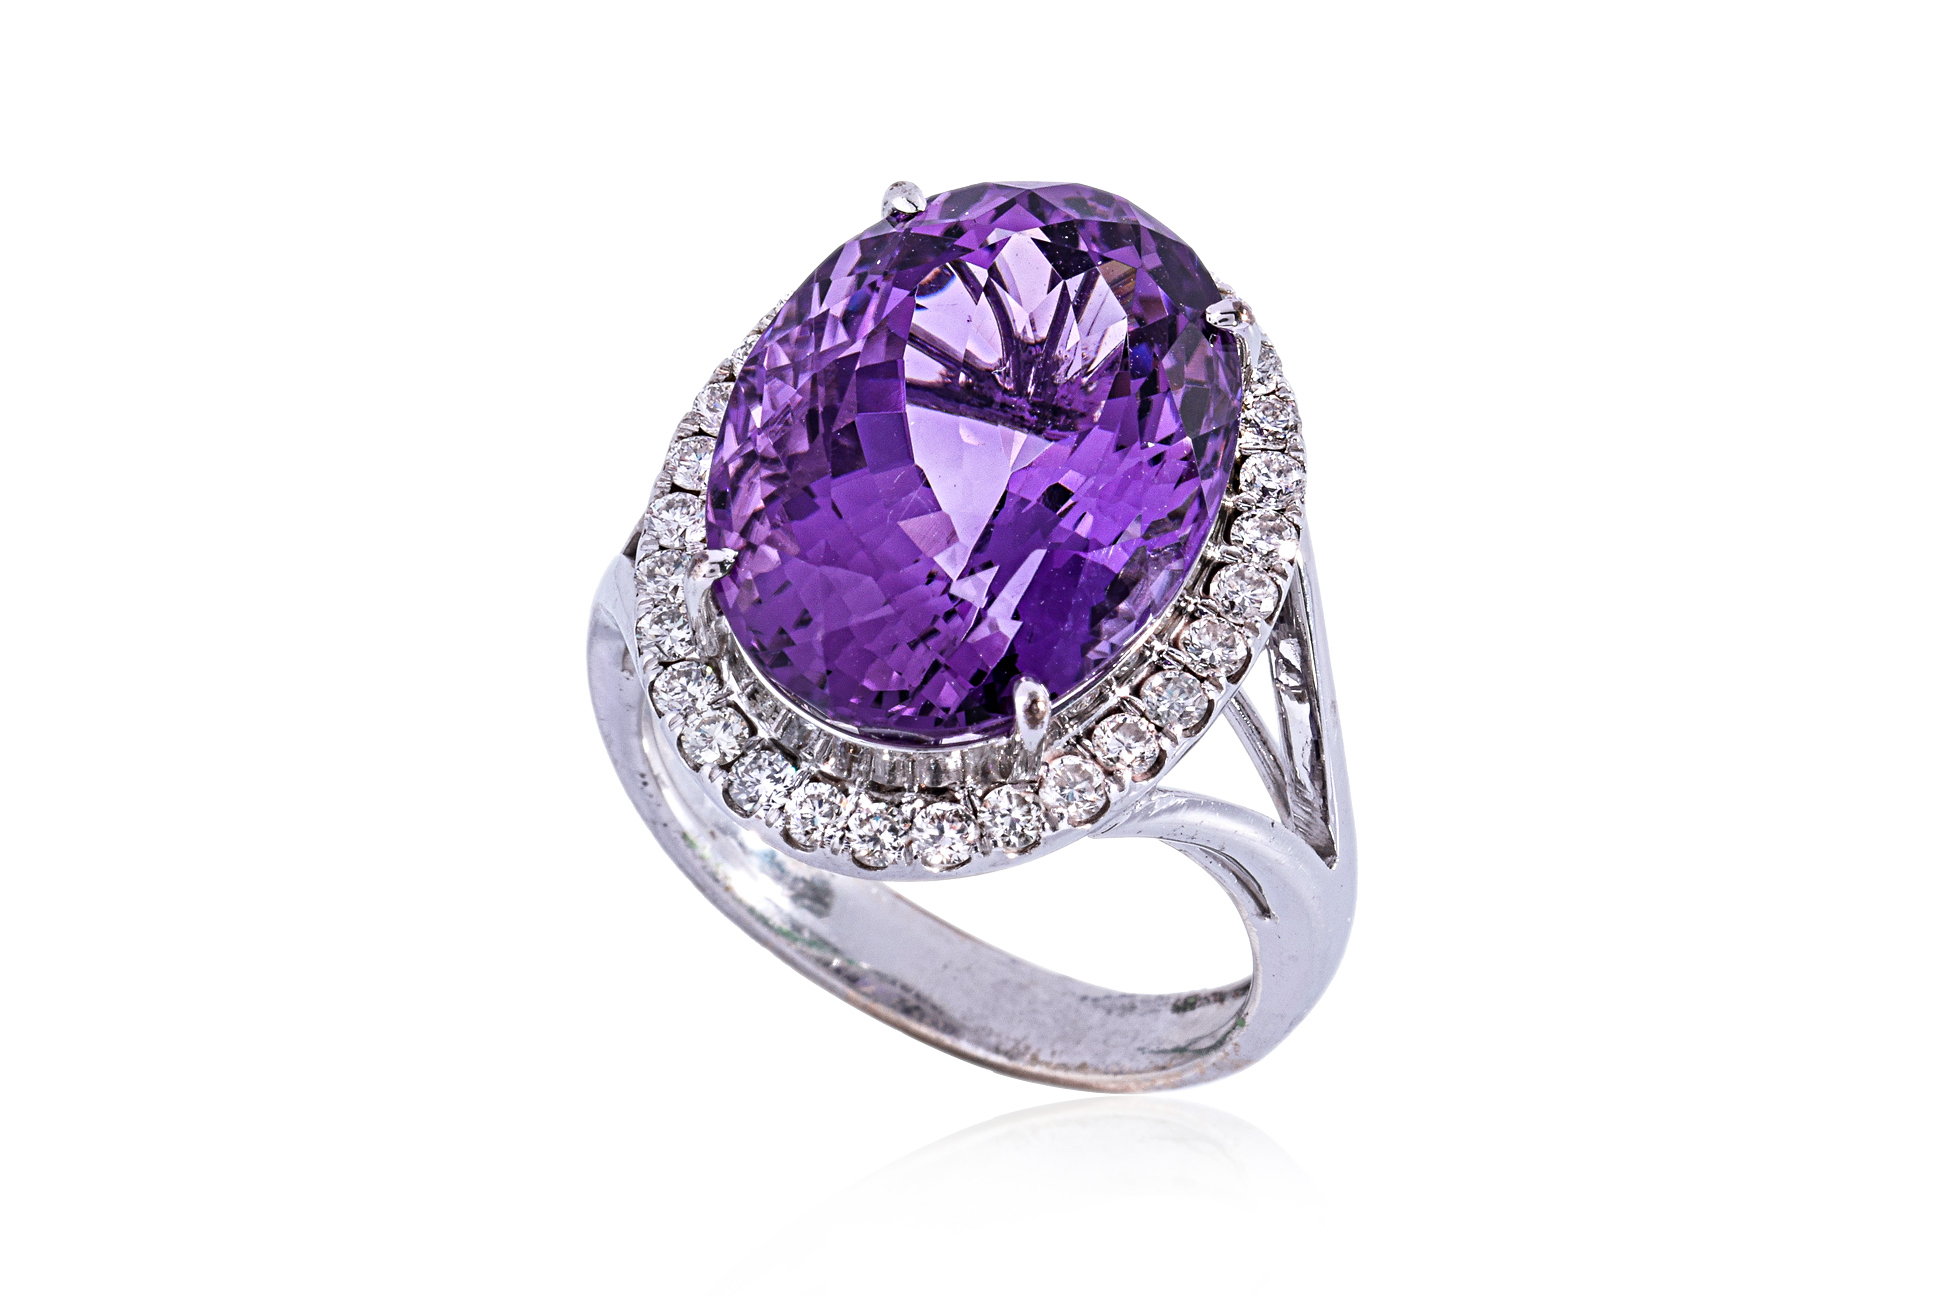 AN AMETHYST AND DIAMOND RING AND PENDANT - Image 4 of 5